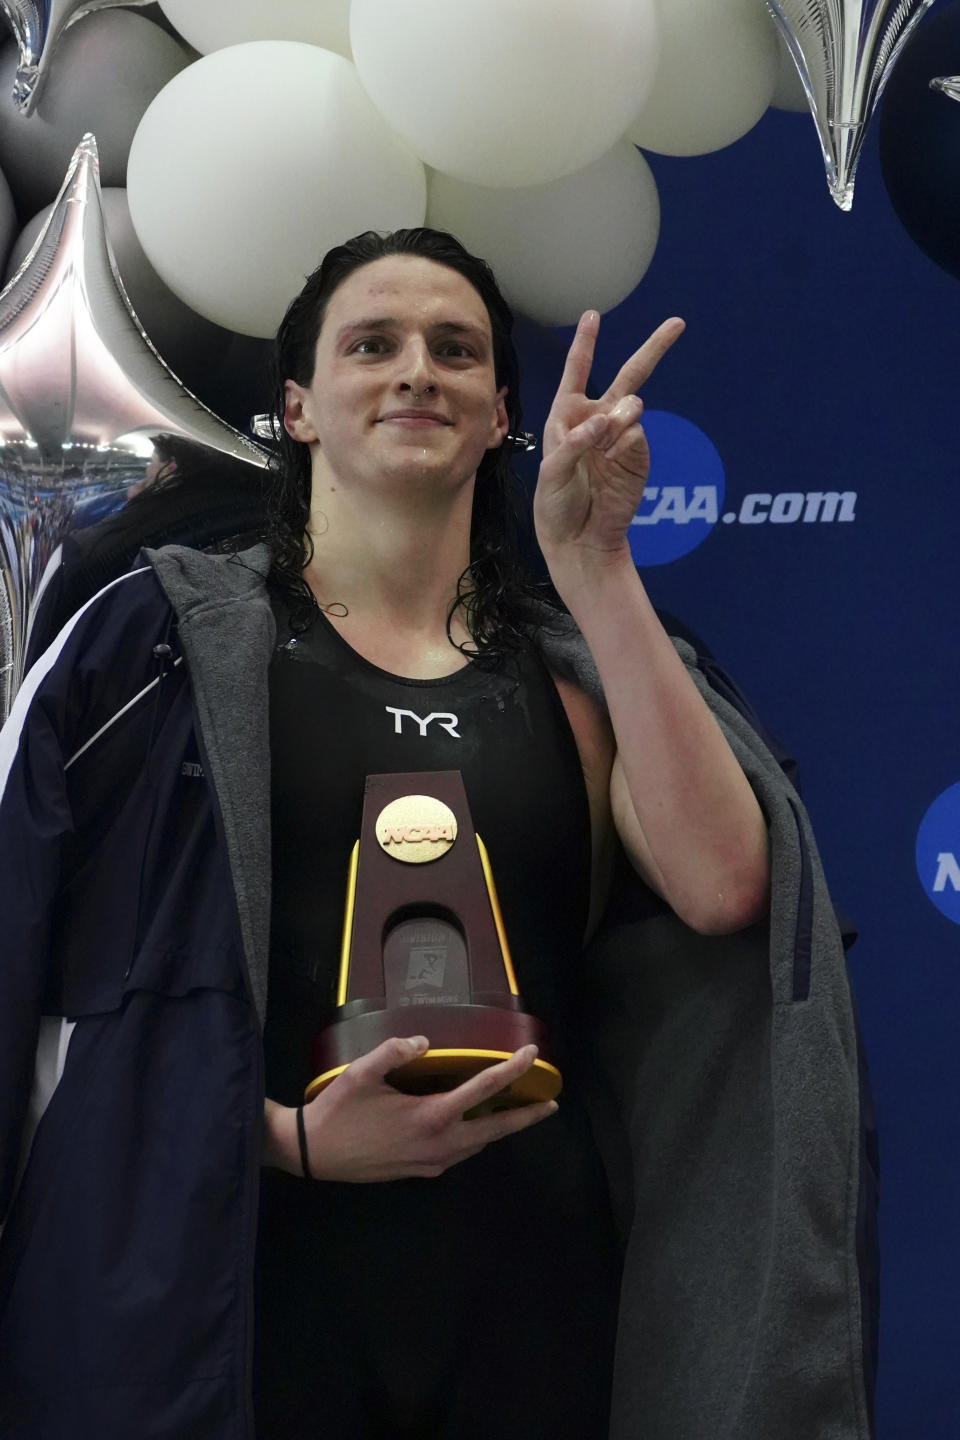 Pennsylvania's Lia Thomas gestures as she holds the trophy after winning the 500-yard freestyle at the NCAA swimming and diving championships Thursday, March 17, 2022, at Georgia Tech in Atlanta. Thomas is the first known transgender woman to win an NCAA swimming championship. (AP Photo/John Bazemore)